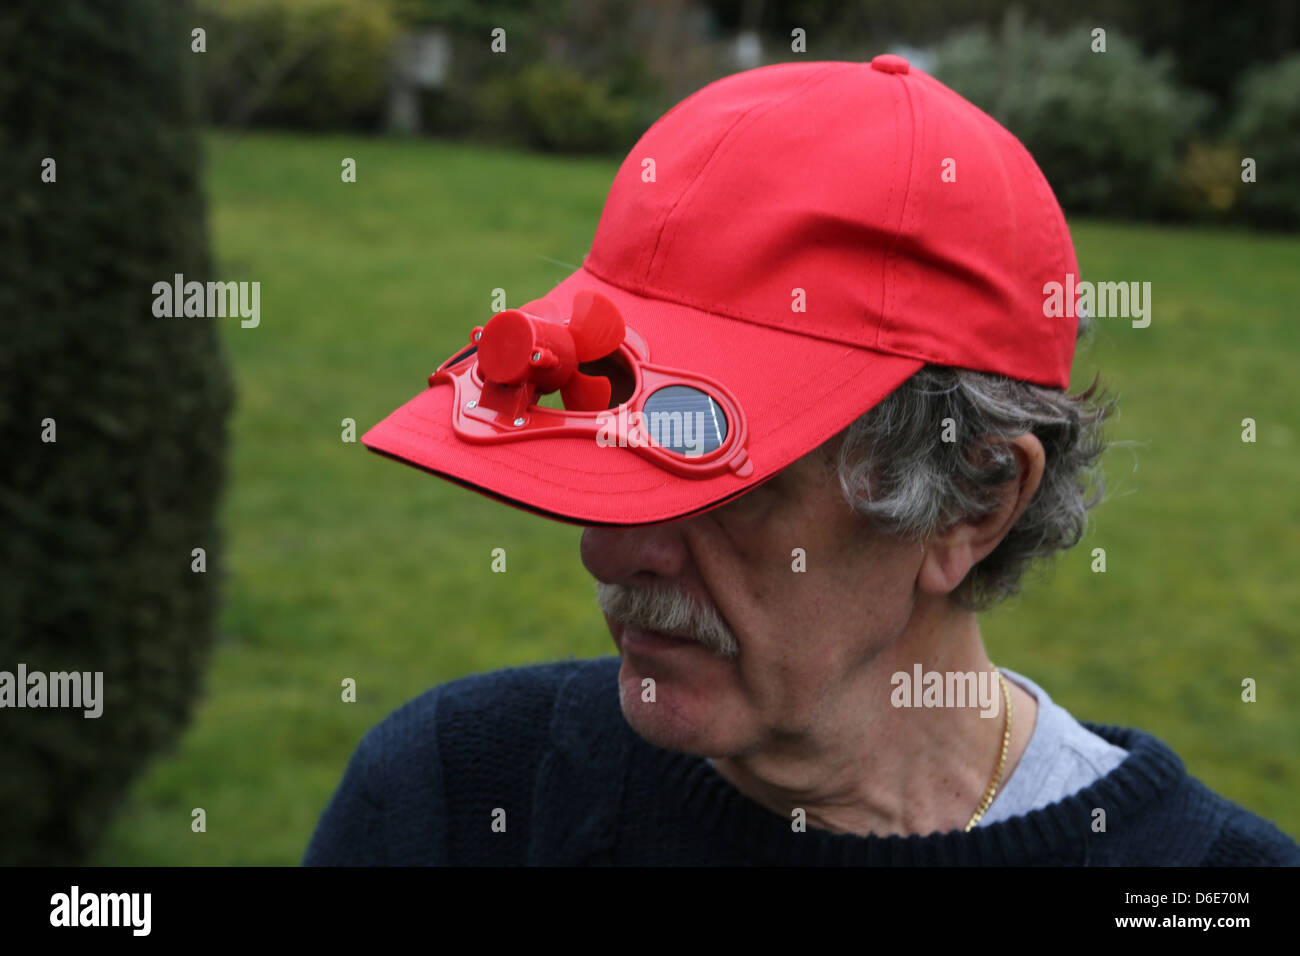 Man Wearing Red Baseball Cap With Solar Powered Fan Stock Photo - Alamy